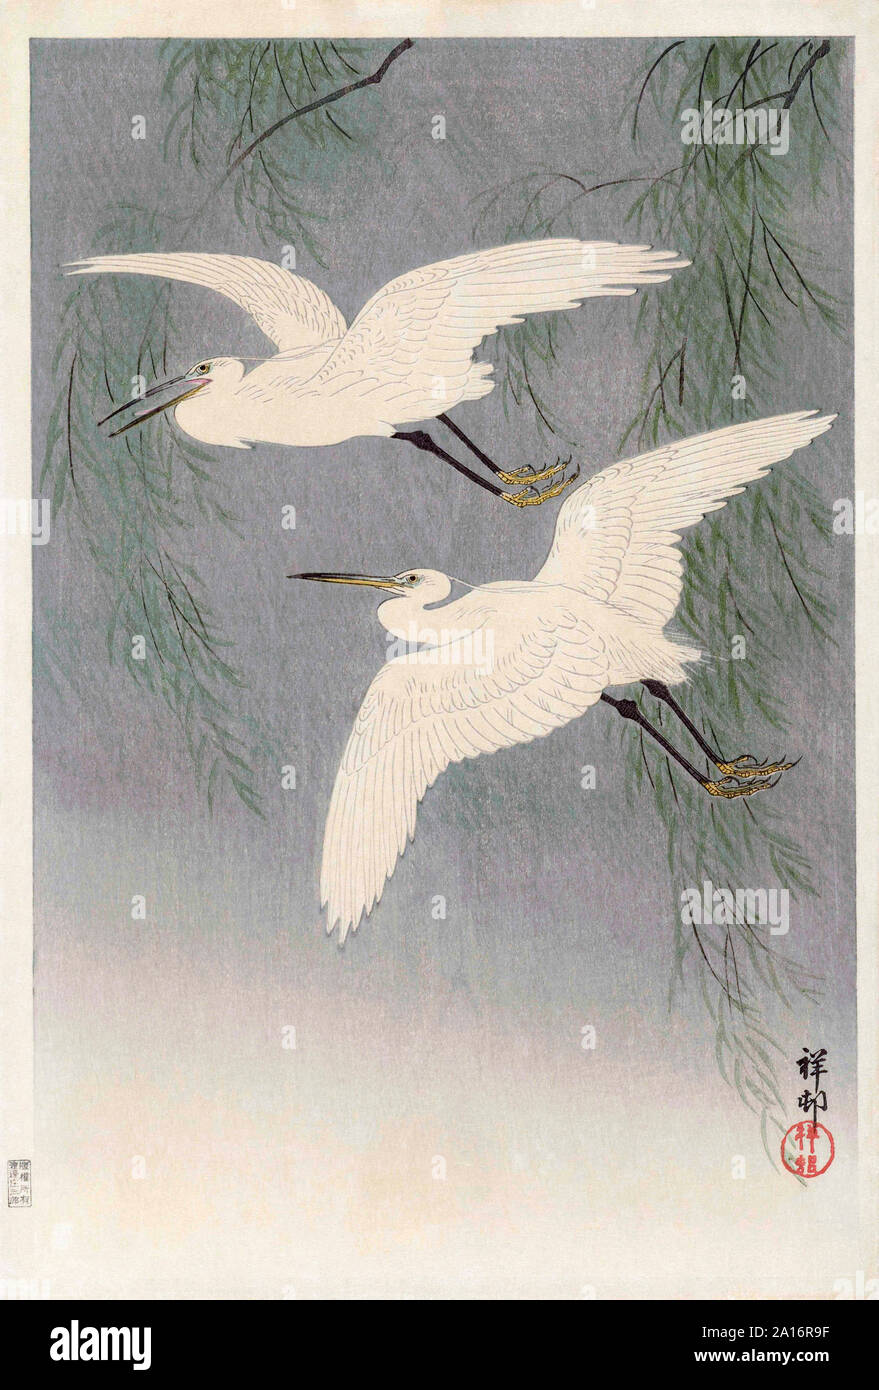 Two Little Egrets in Flight, by Japanese artist Ohara Koson, 1877 - 1945.  Ohara Koson was part of the shin-hanga, or new prints movement. Stock Photo